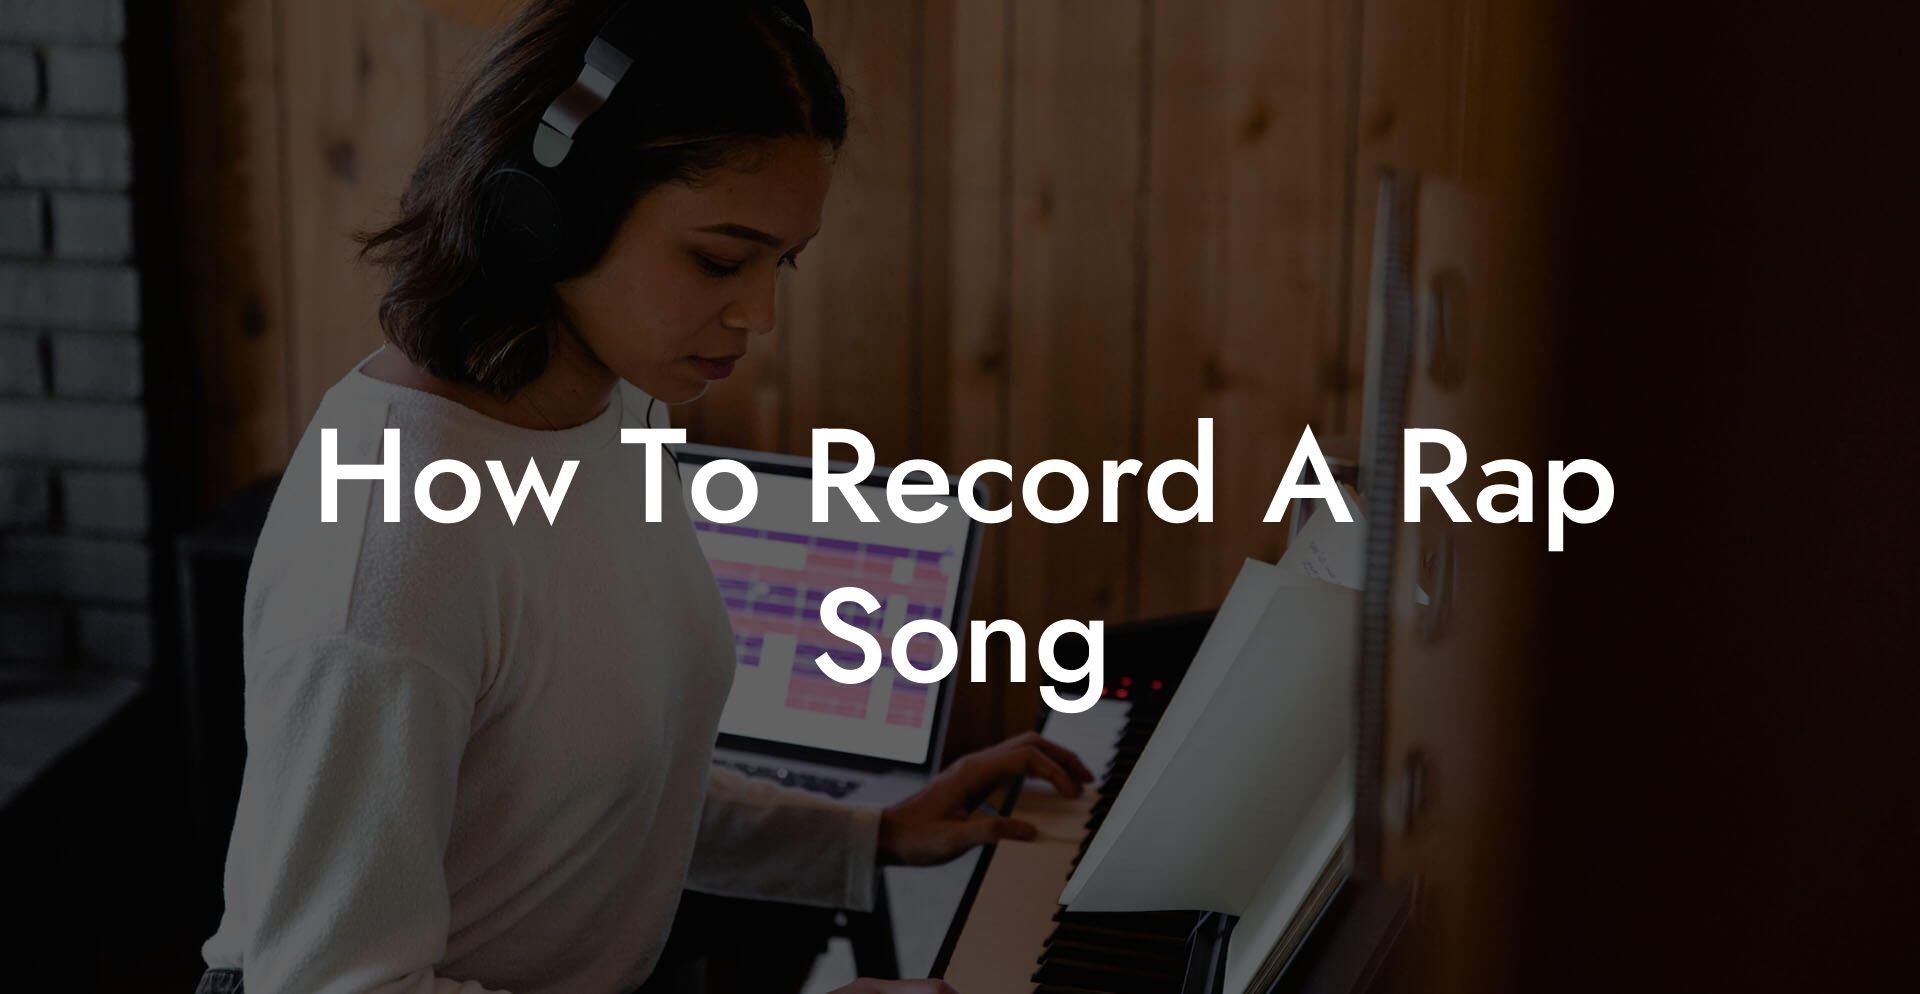 how to record a rap song lyric assistant